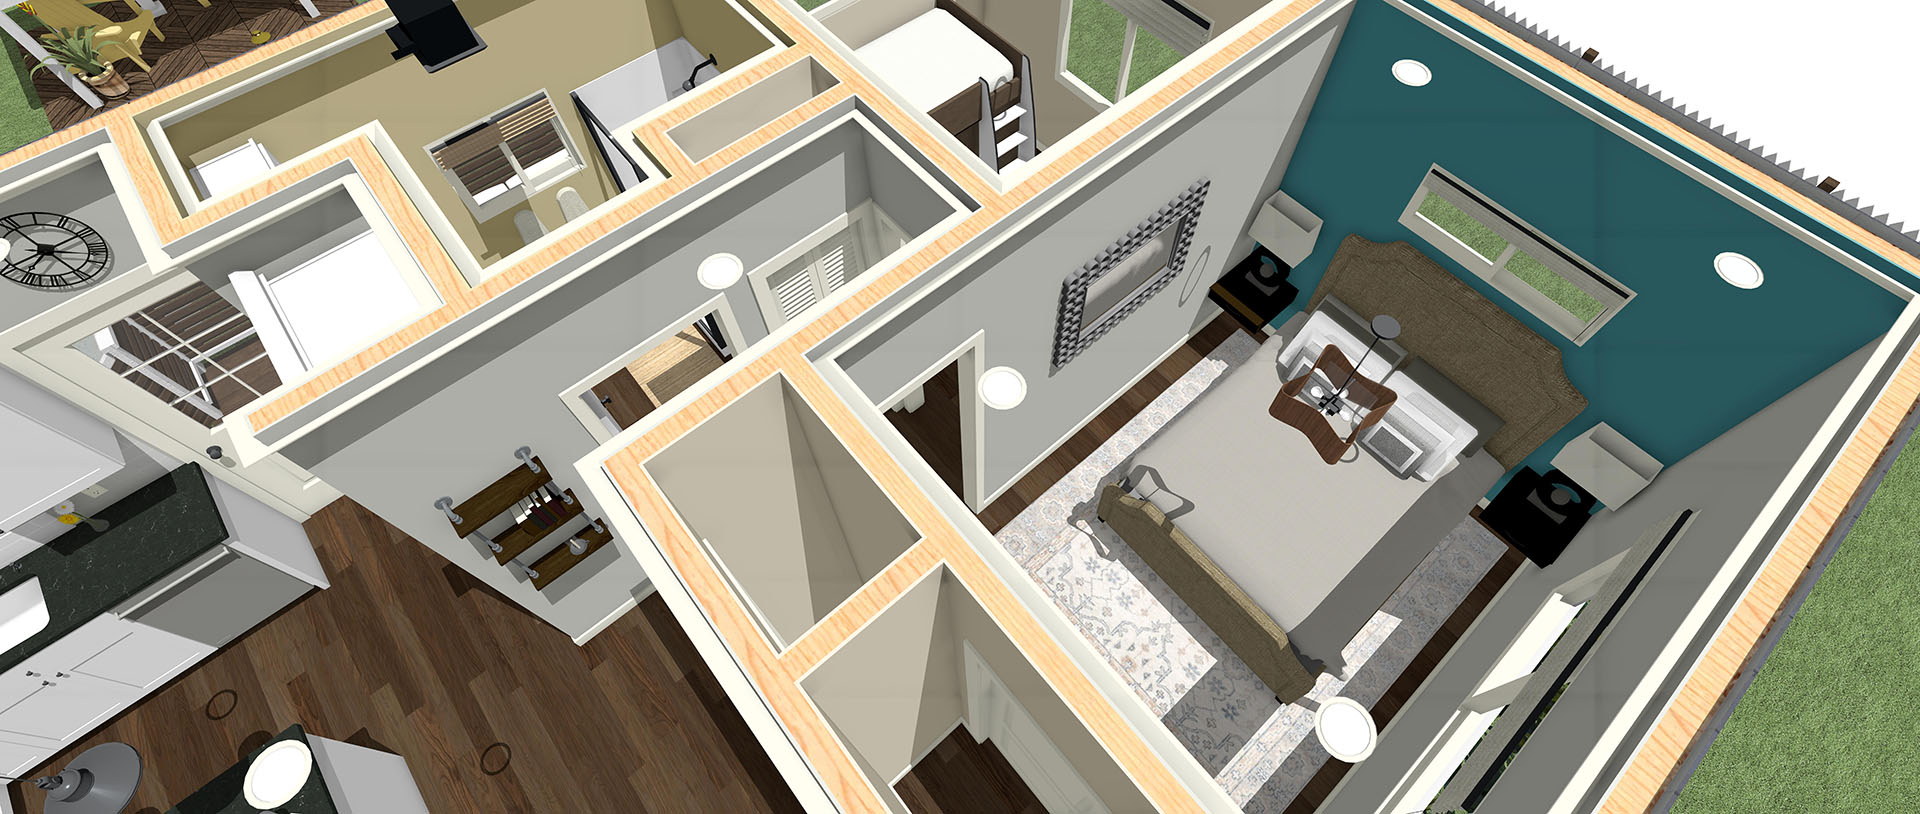 Top aerial view of a house with 4 rooms